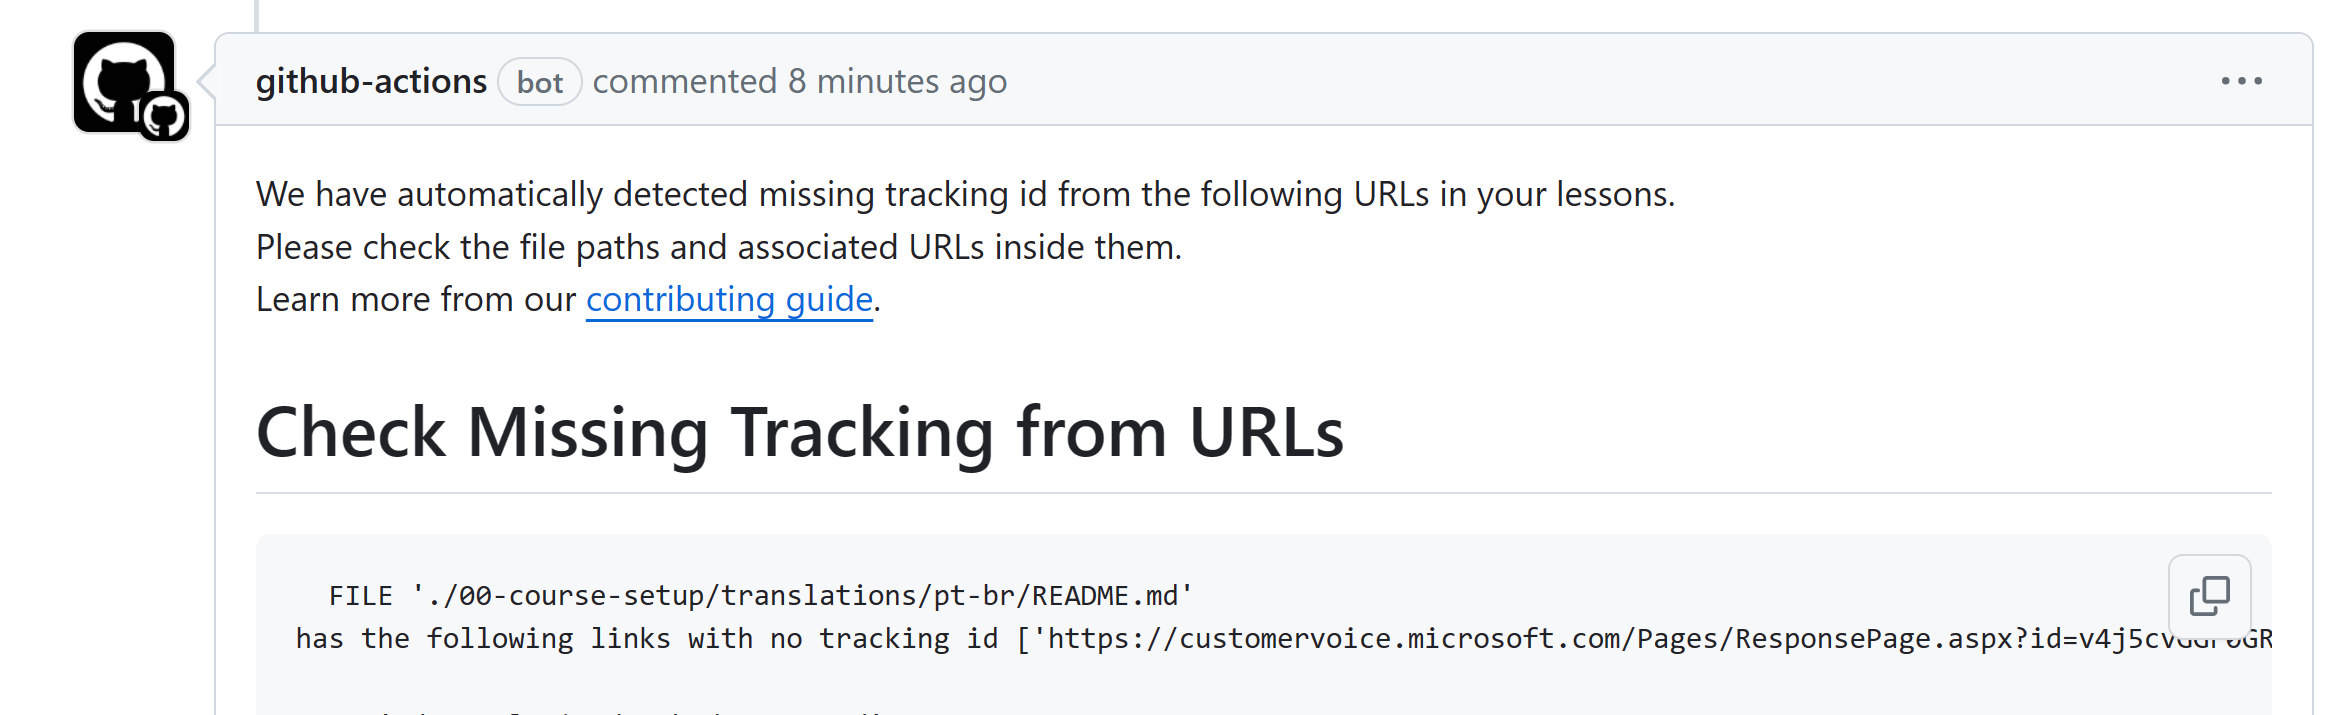 github-check-urls-missing-tracking-comment.png